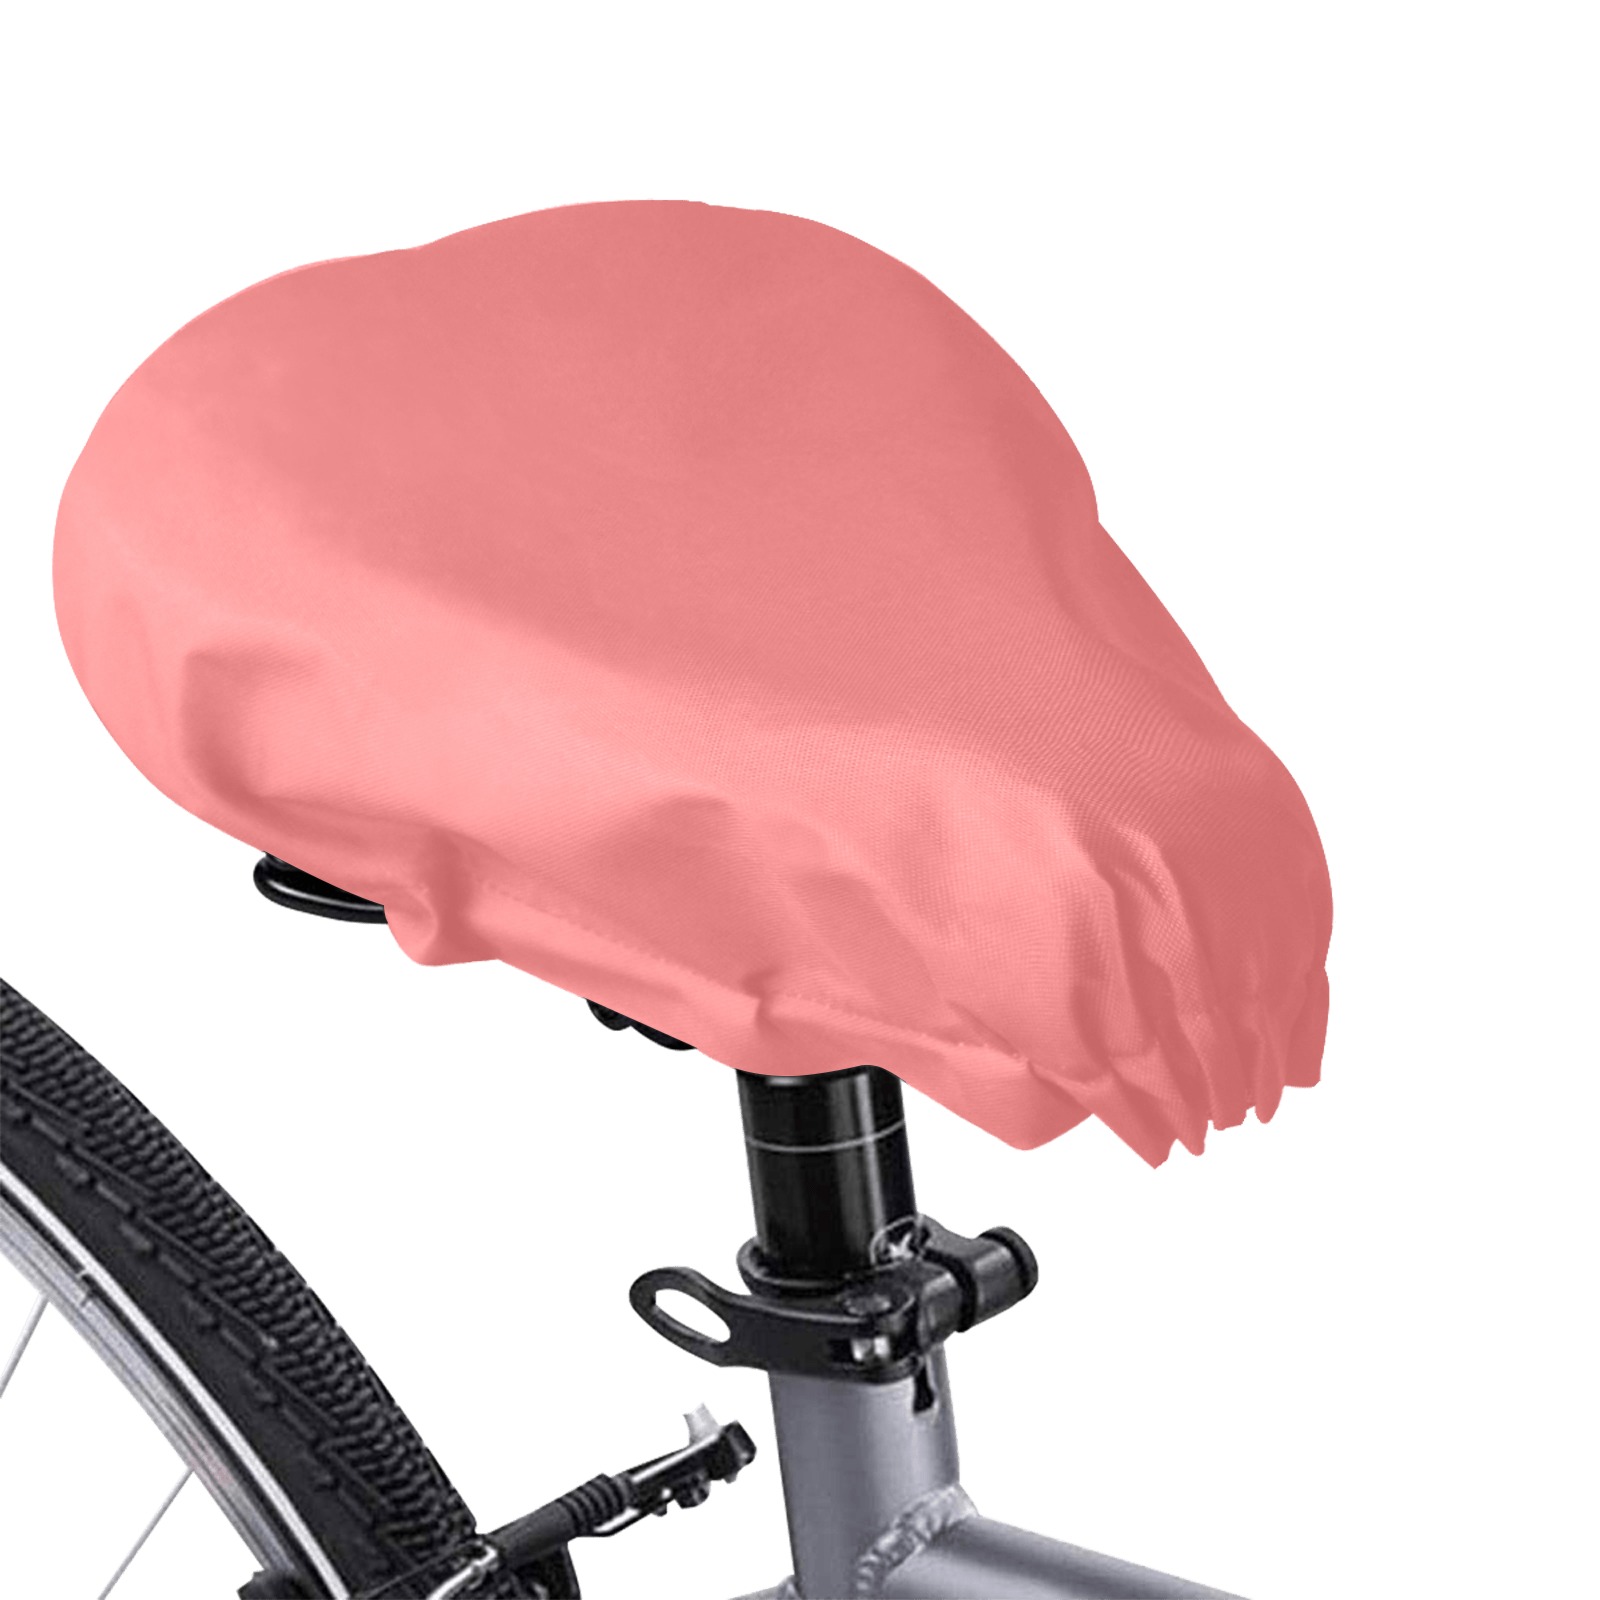 color light red Waterproof Bicycle Seat Cover